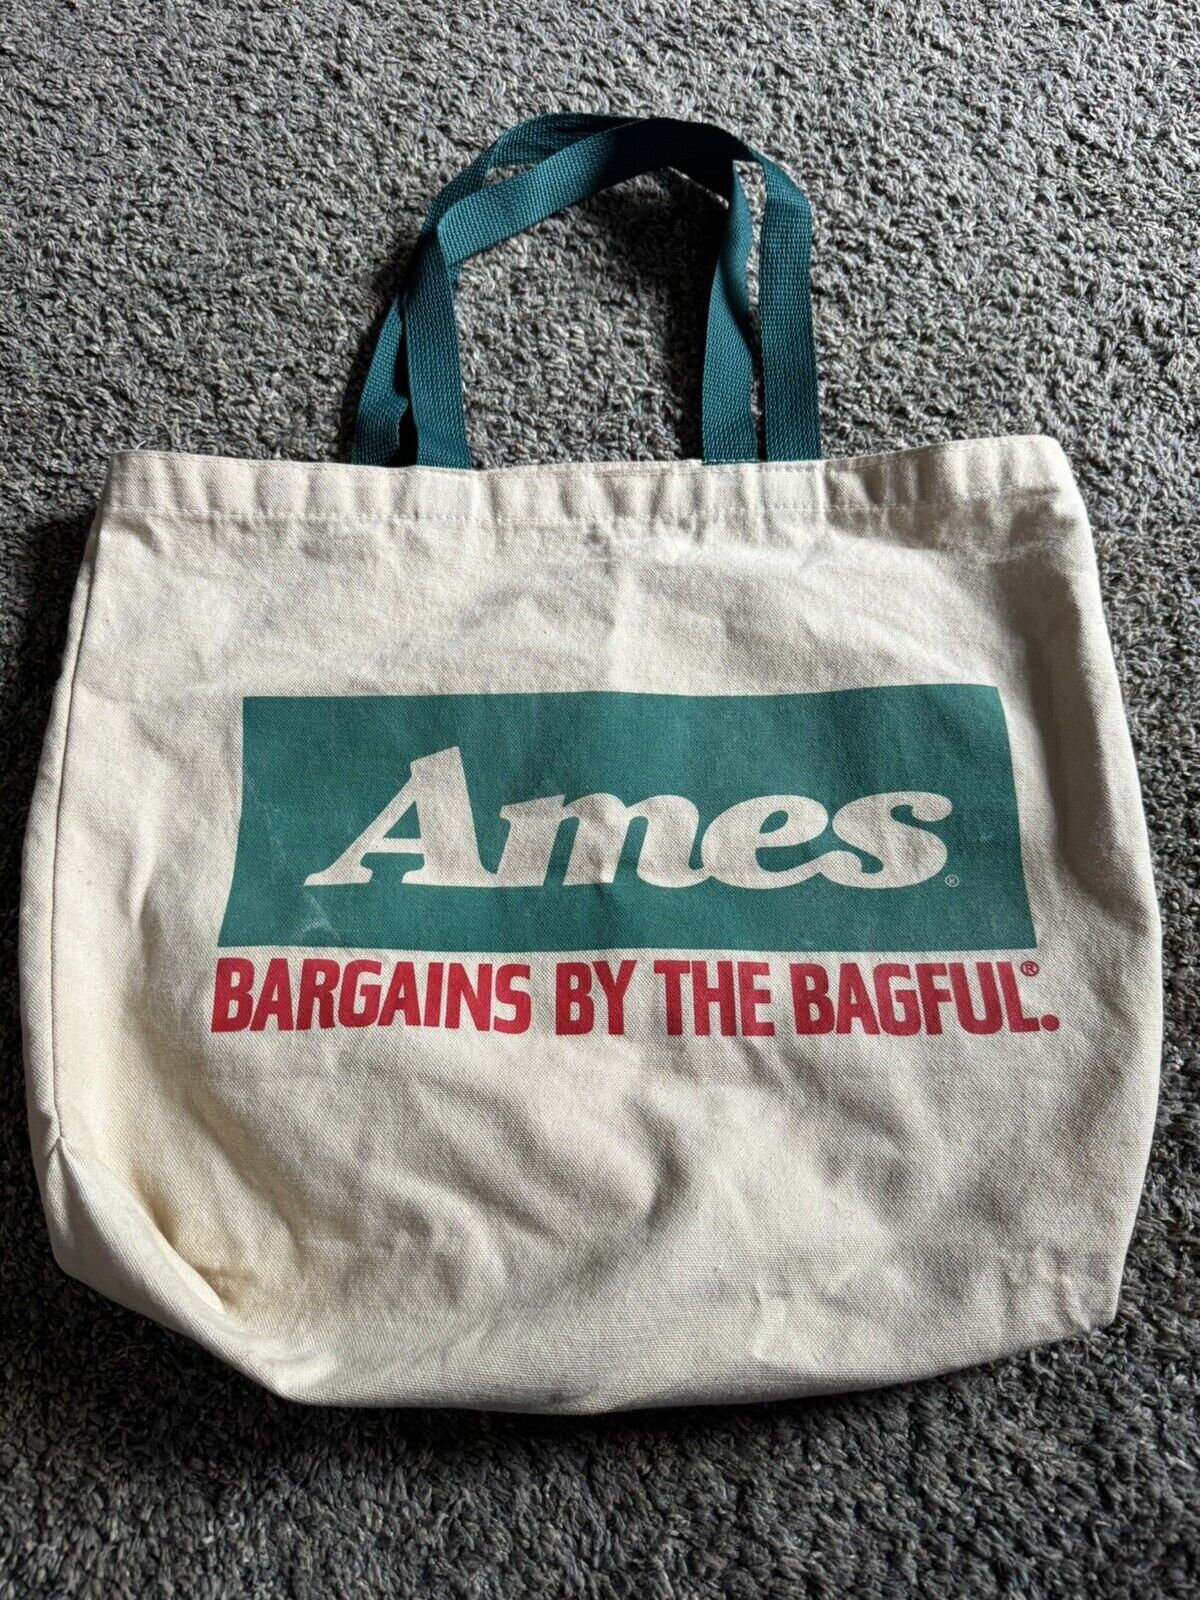 AMES DEPARTMENT STORE Canvas Shopping Bag Tote Green Handles Vintage